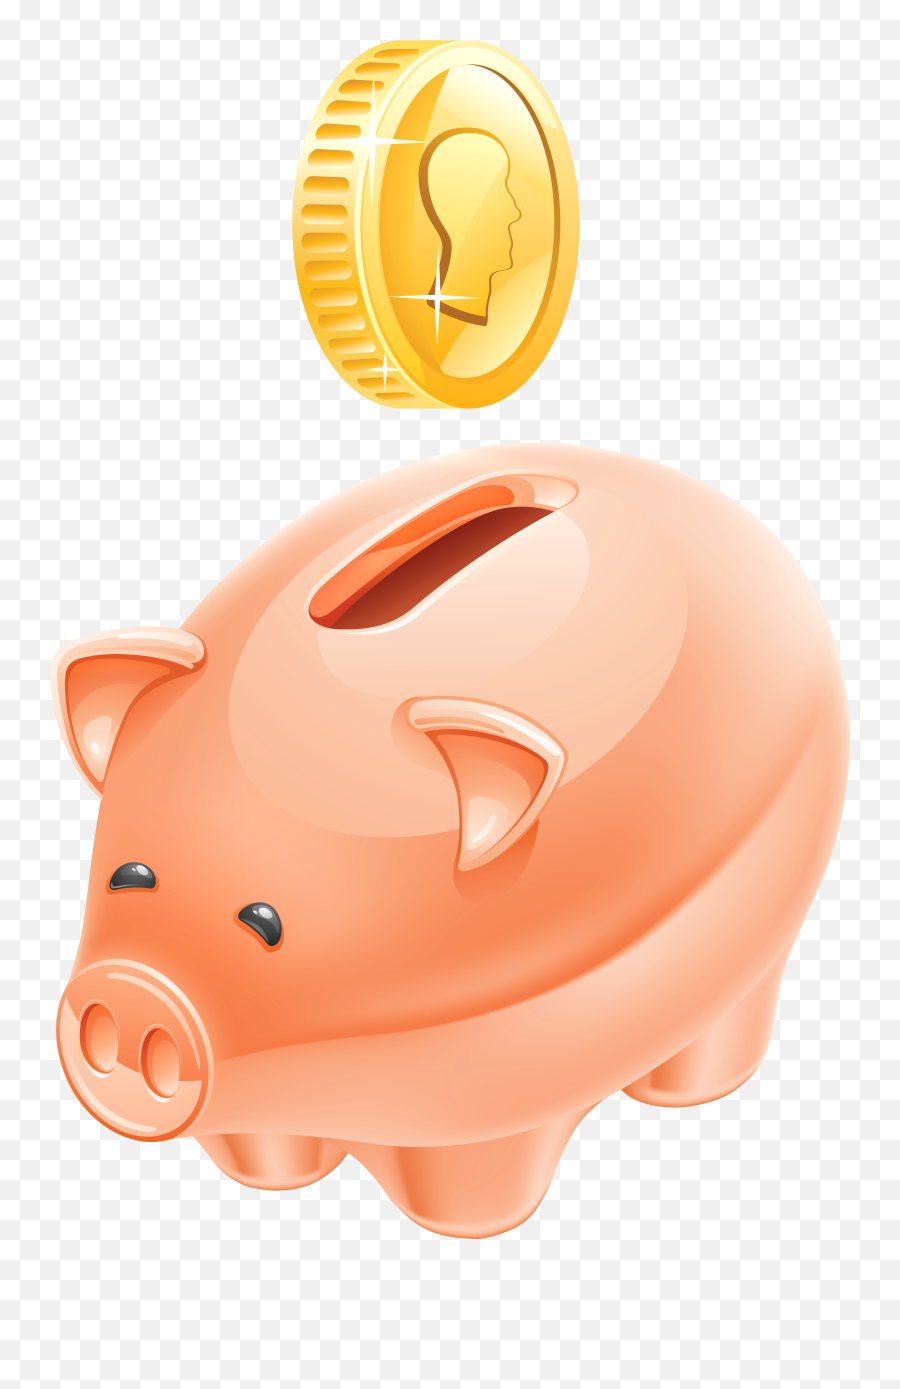 Free Picture Of A Piggy Bank Download Free Picture Of A - Piggy Bank Png File Emoji,Emoji Coin Bank